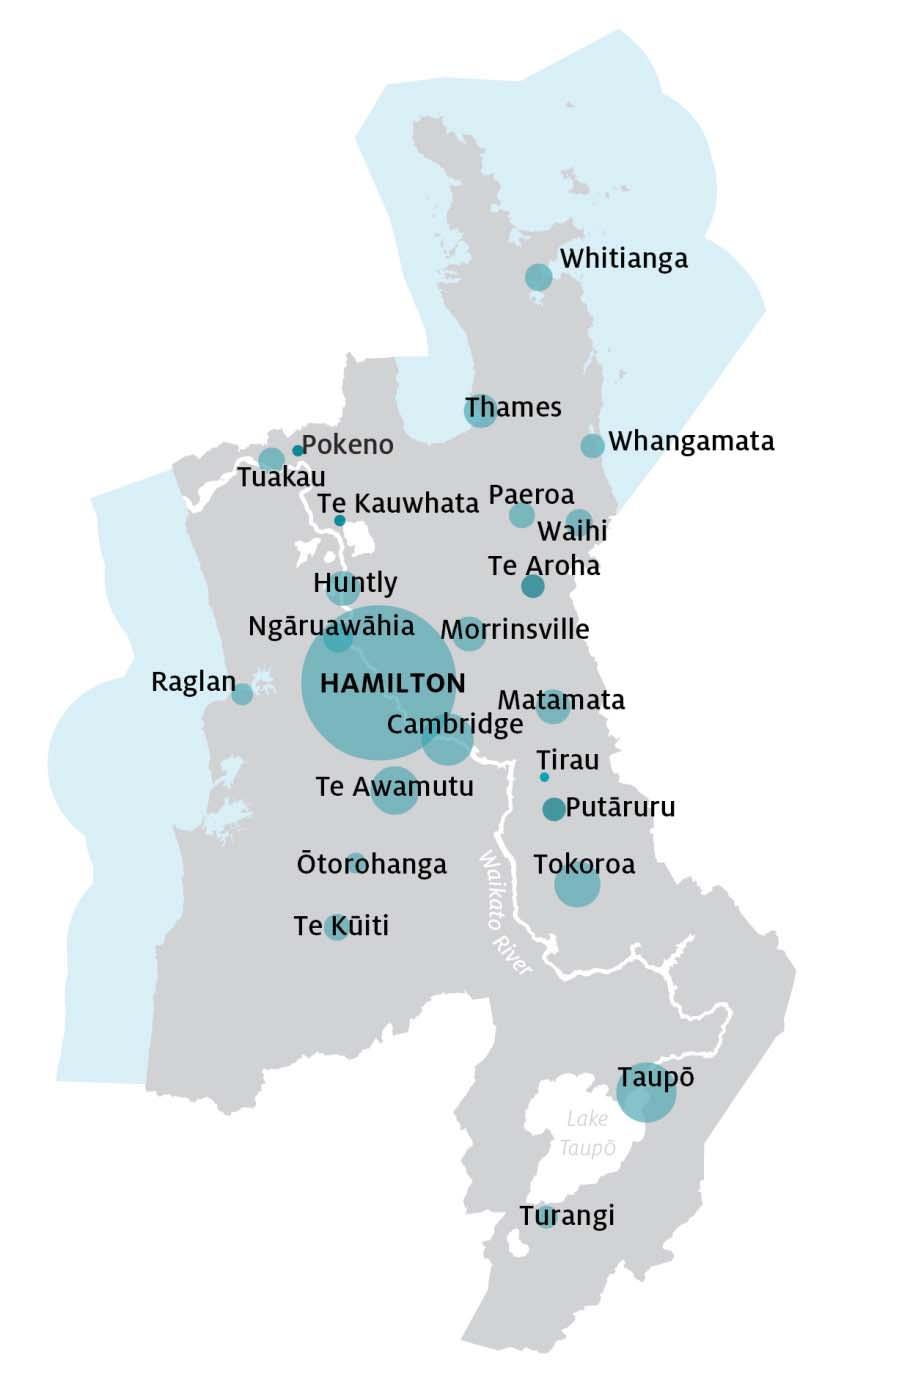 Hamilton City has a population of 156,800, and increased its share of the regional population from 29 per cent in 1986 to 36 per cent in 2015.